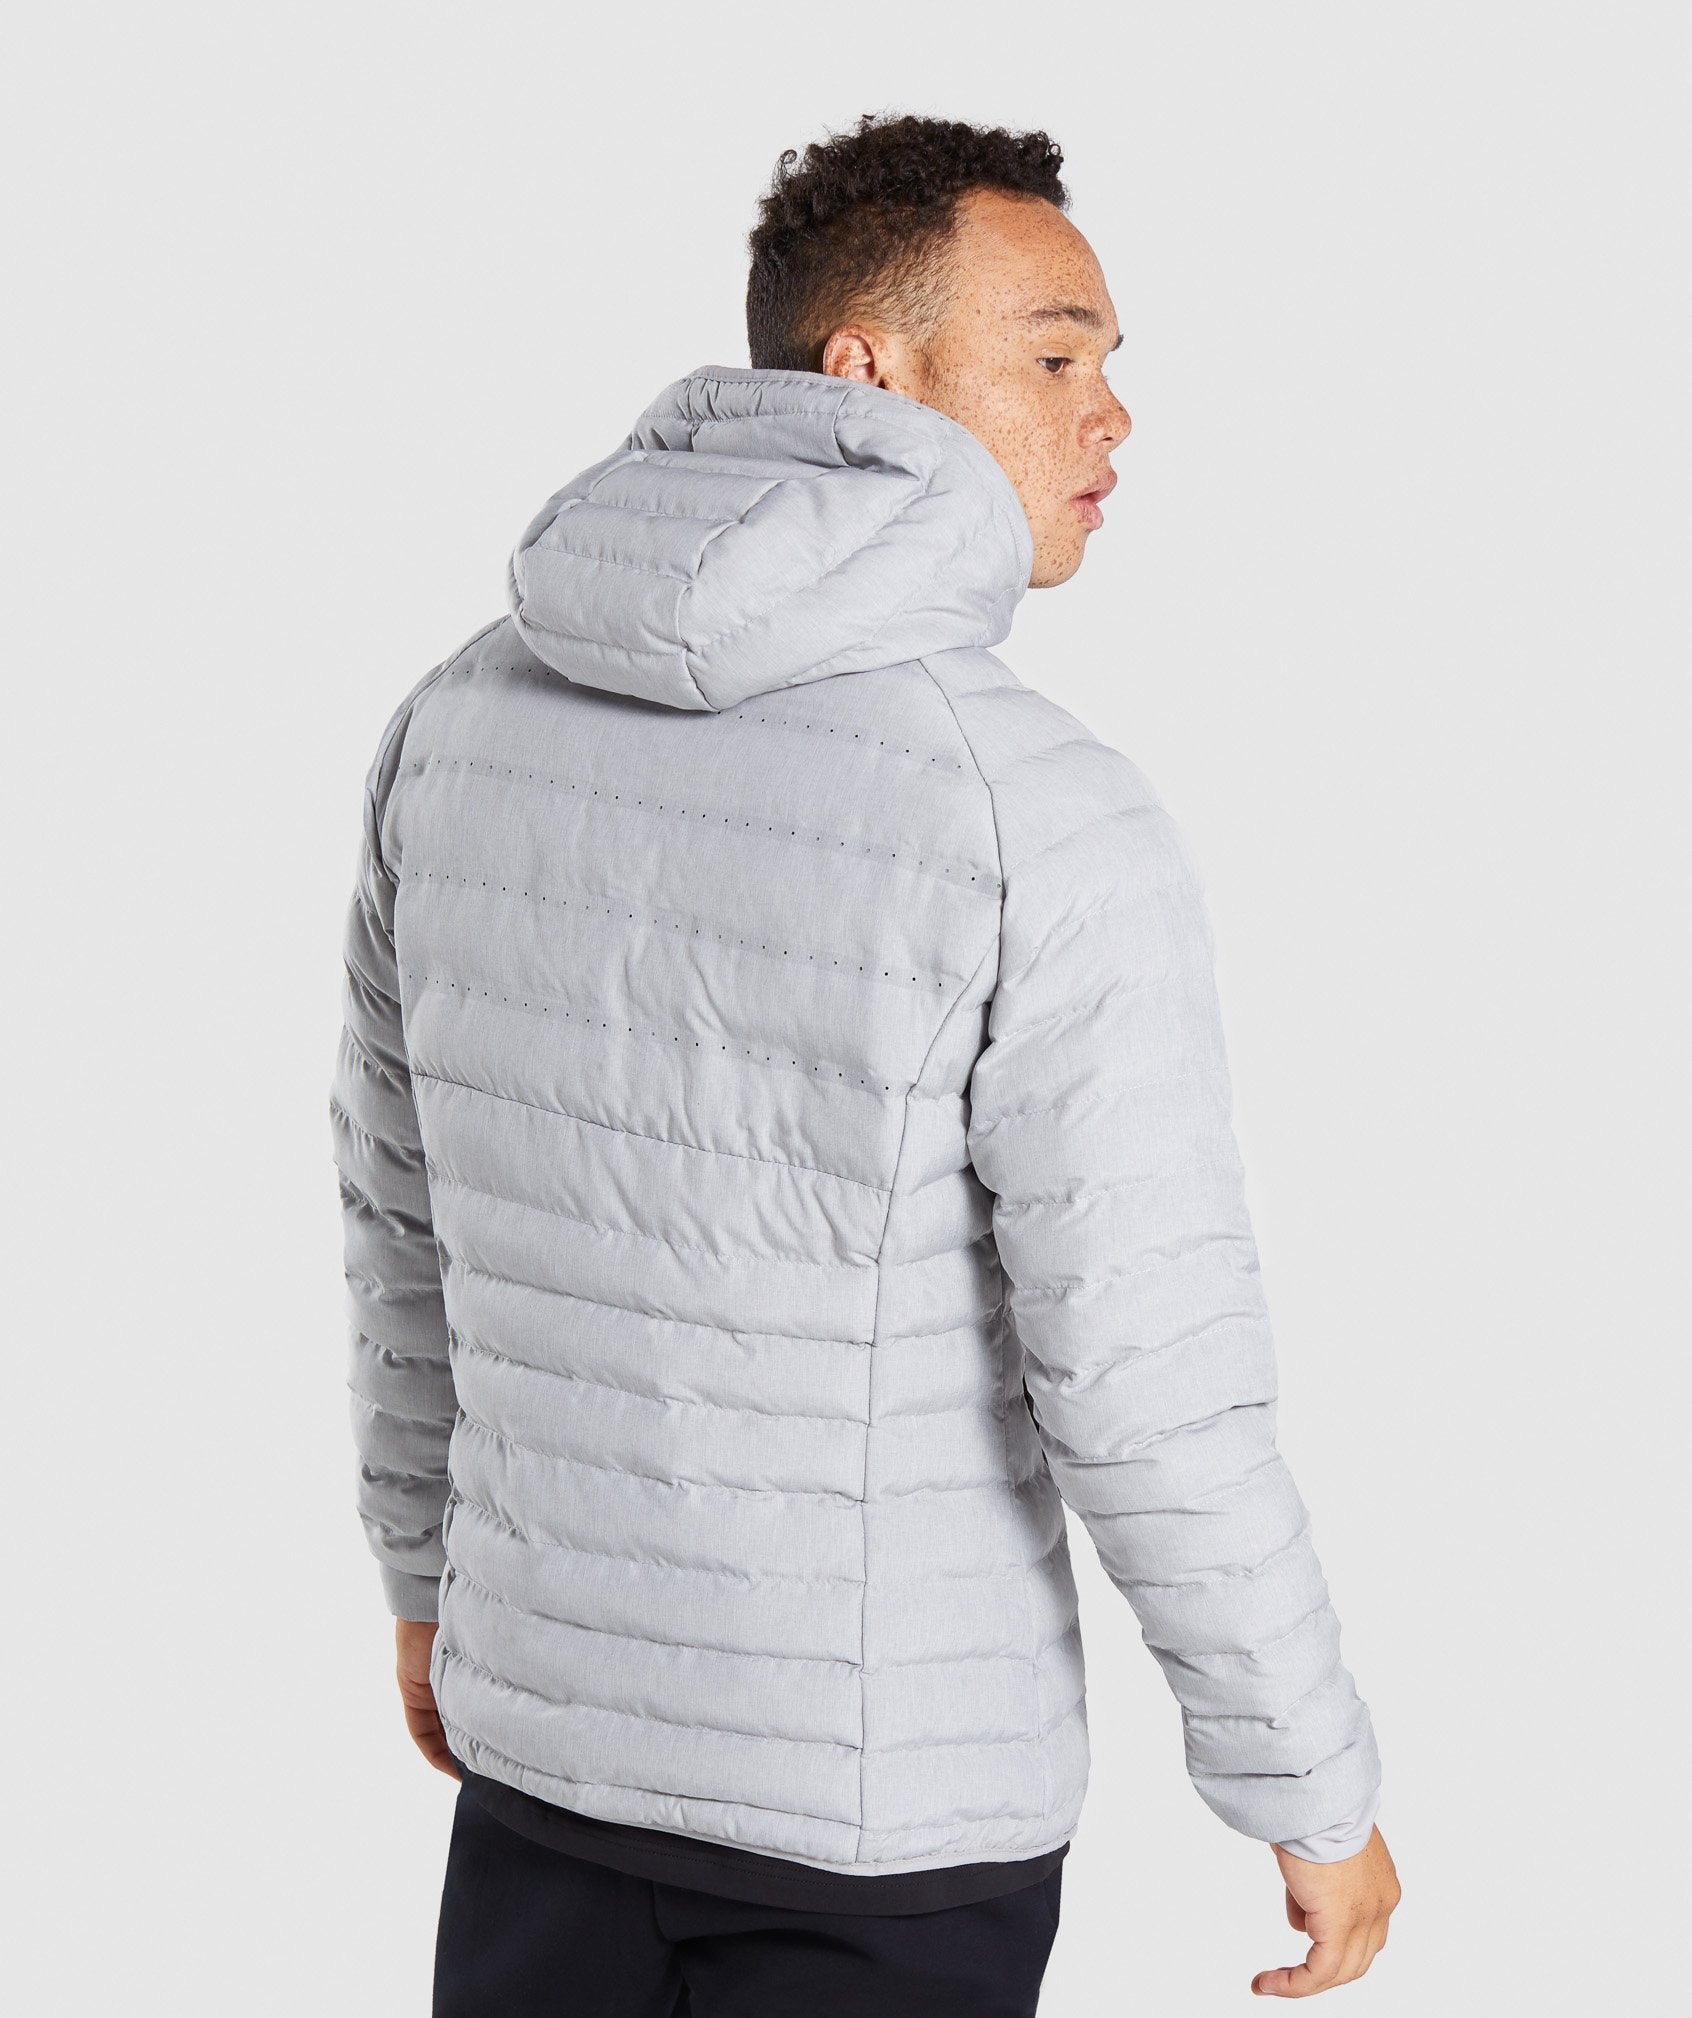 Sector Jacket V2 in Light Grey - view 2